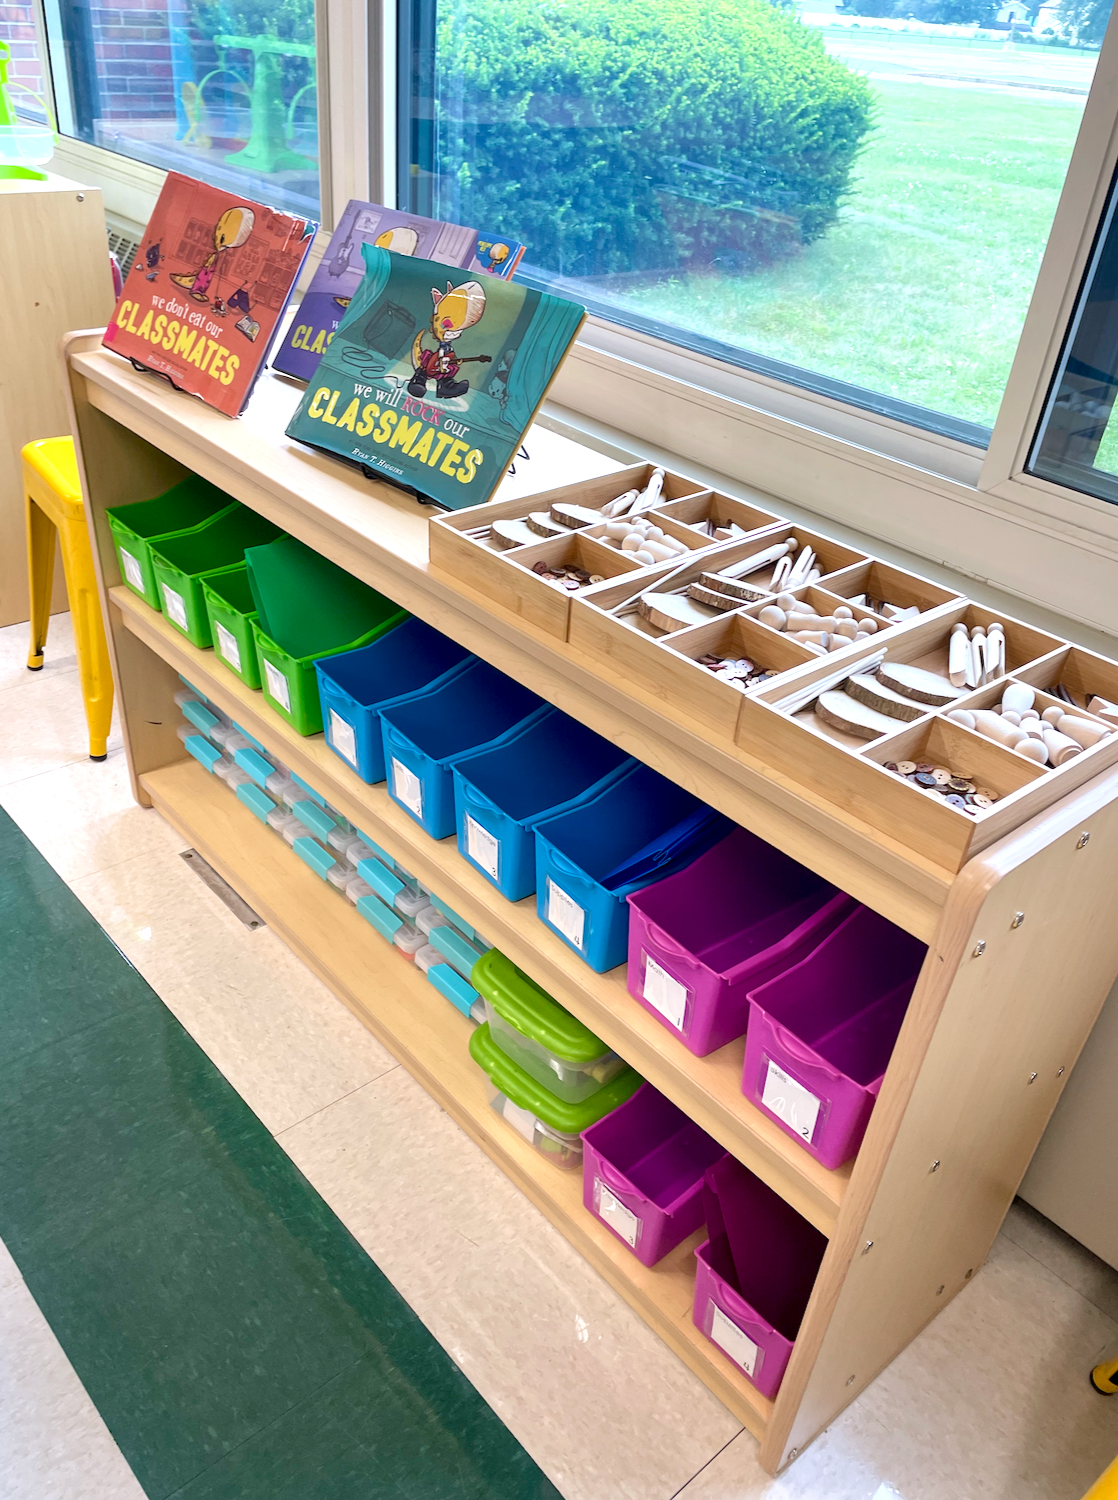 How I organized shared materials in my 1st grade classroom with color coded bins and pencil cases